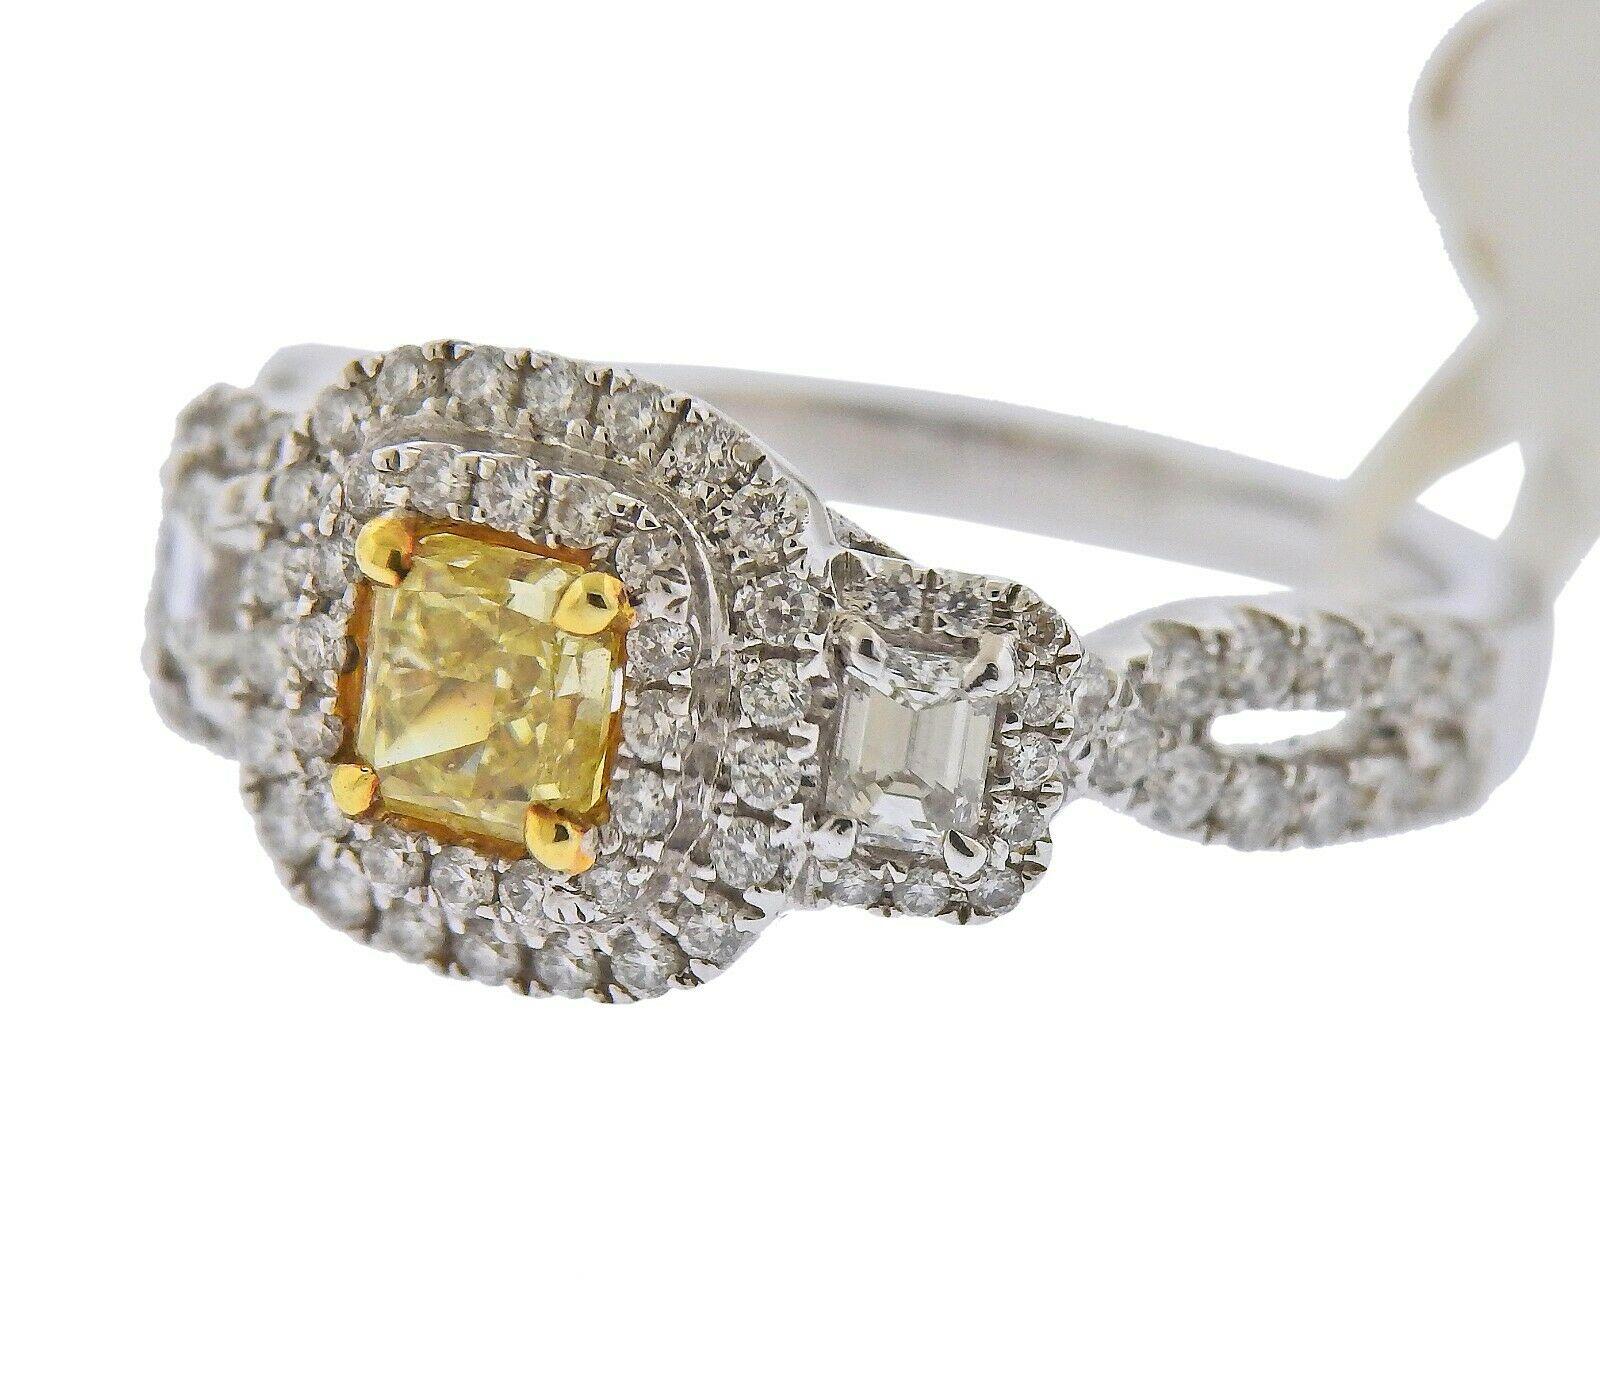 18k white gold engagement ring by Dalumi. Set with a 0.58ct Radiant cut VS1/ fancy yellow diamond in the center, surrounded by 0.72ctw of VS1/H diamonds. retail $7999. Ring size - 6.5, ring top - 10mm x 16mm. Marked - DG, 0.58ct, 18k, 750.. Weight